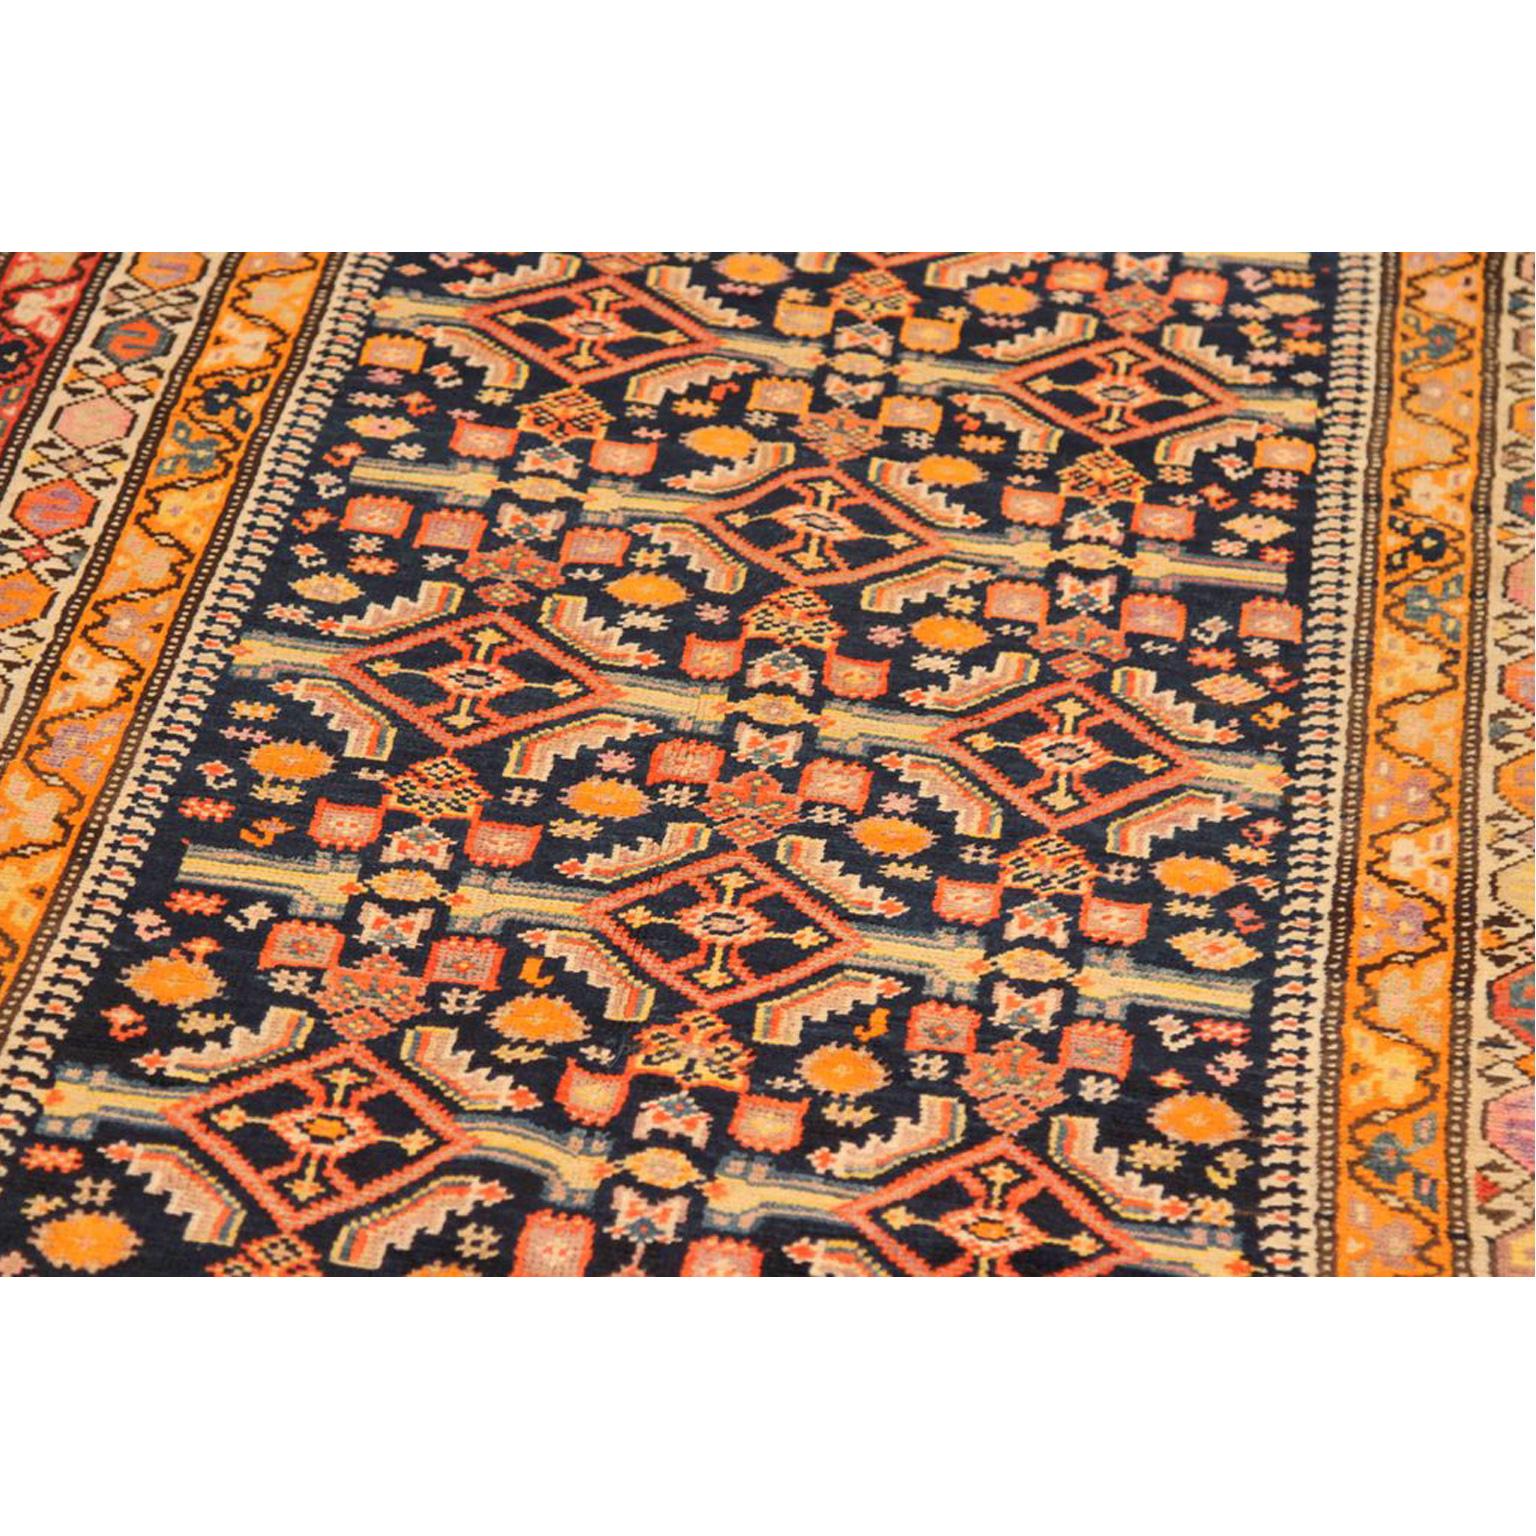 Other 1910s Antique Persian Rug Azerbaijan Style with Fine Floral and Geometric Design For Sale